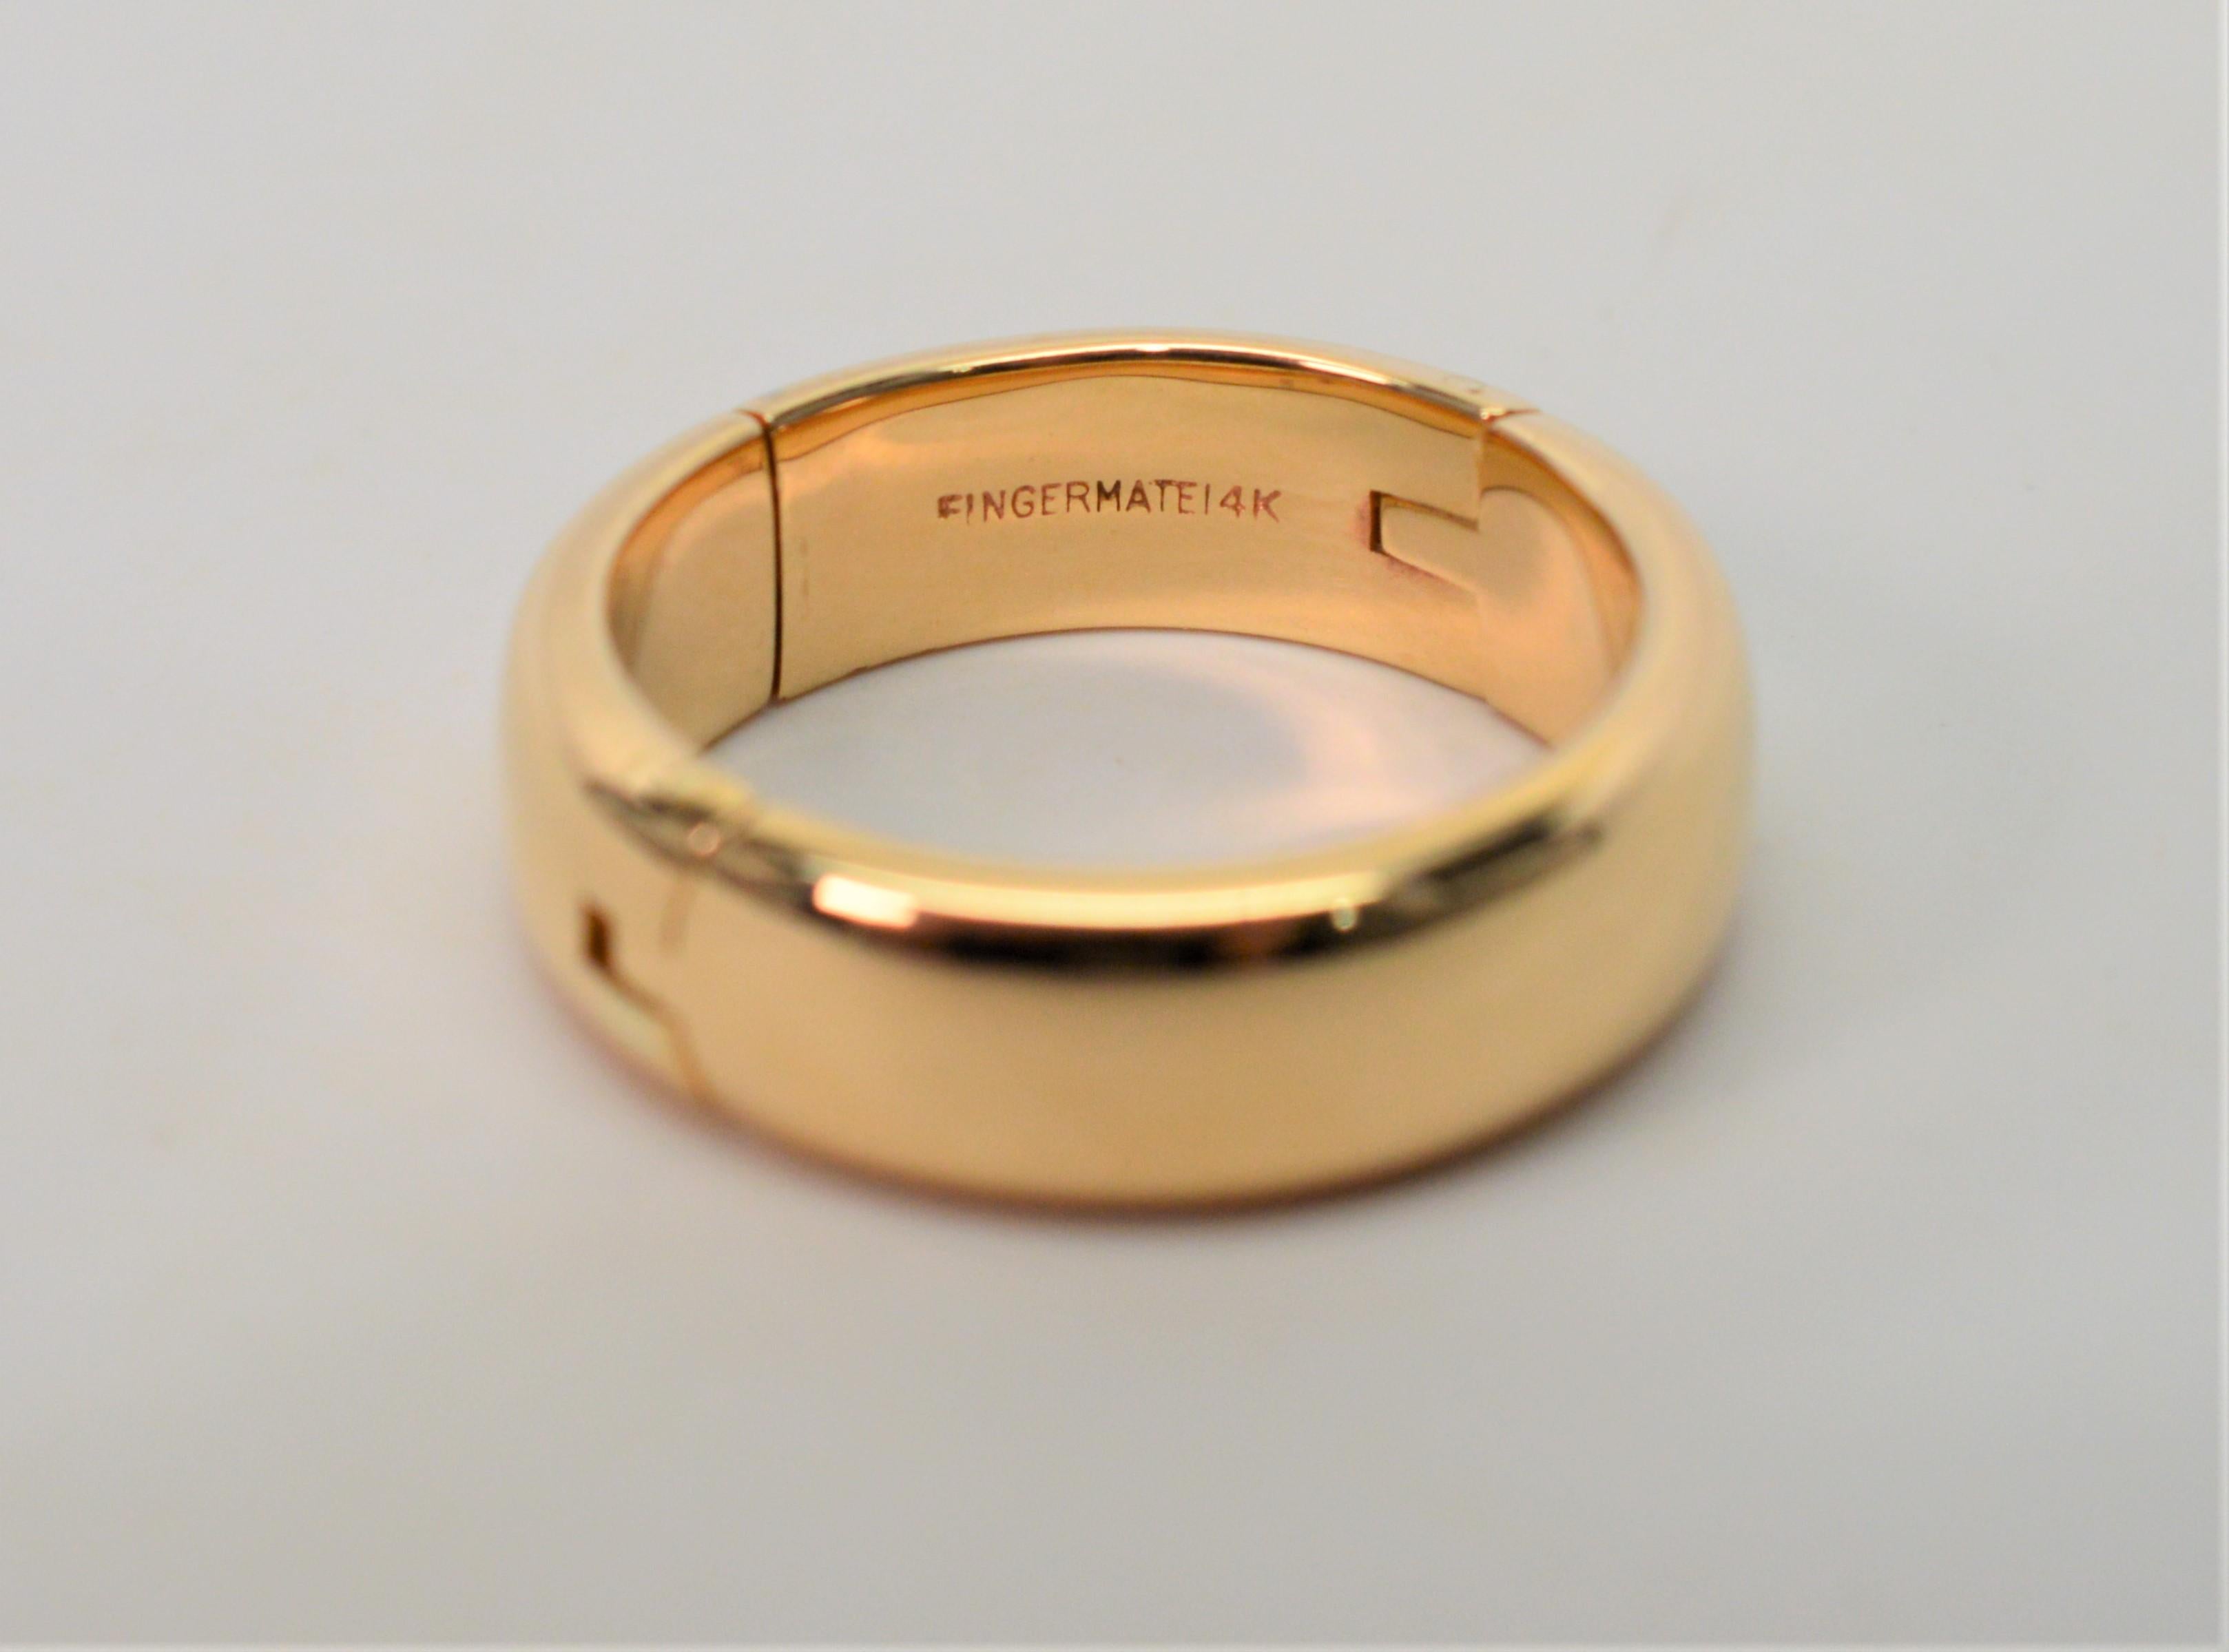 Substantial Gold Band in 14 Karat Yellow Gold crafted with a unique Fingermate adjustable hinge to easily fit this ring over larger knuckles with snap closure to fit when comfortably in place.  In size 9, band measures 6.6mm wide x 2.4mm thick. New